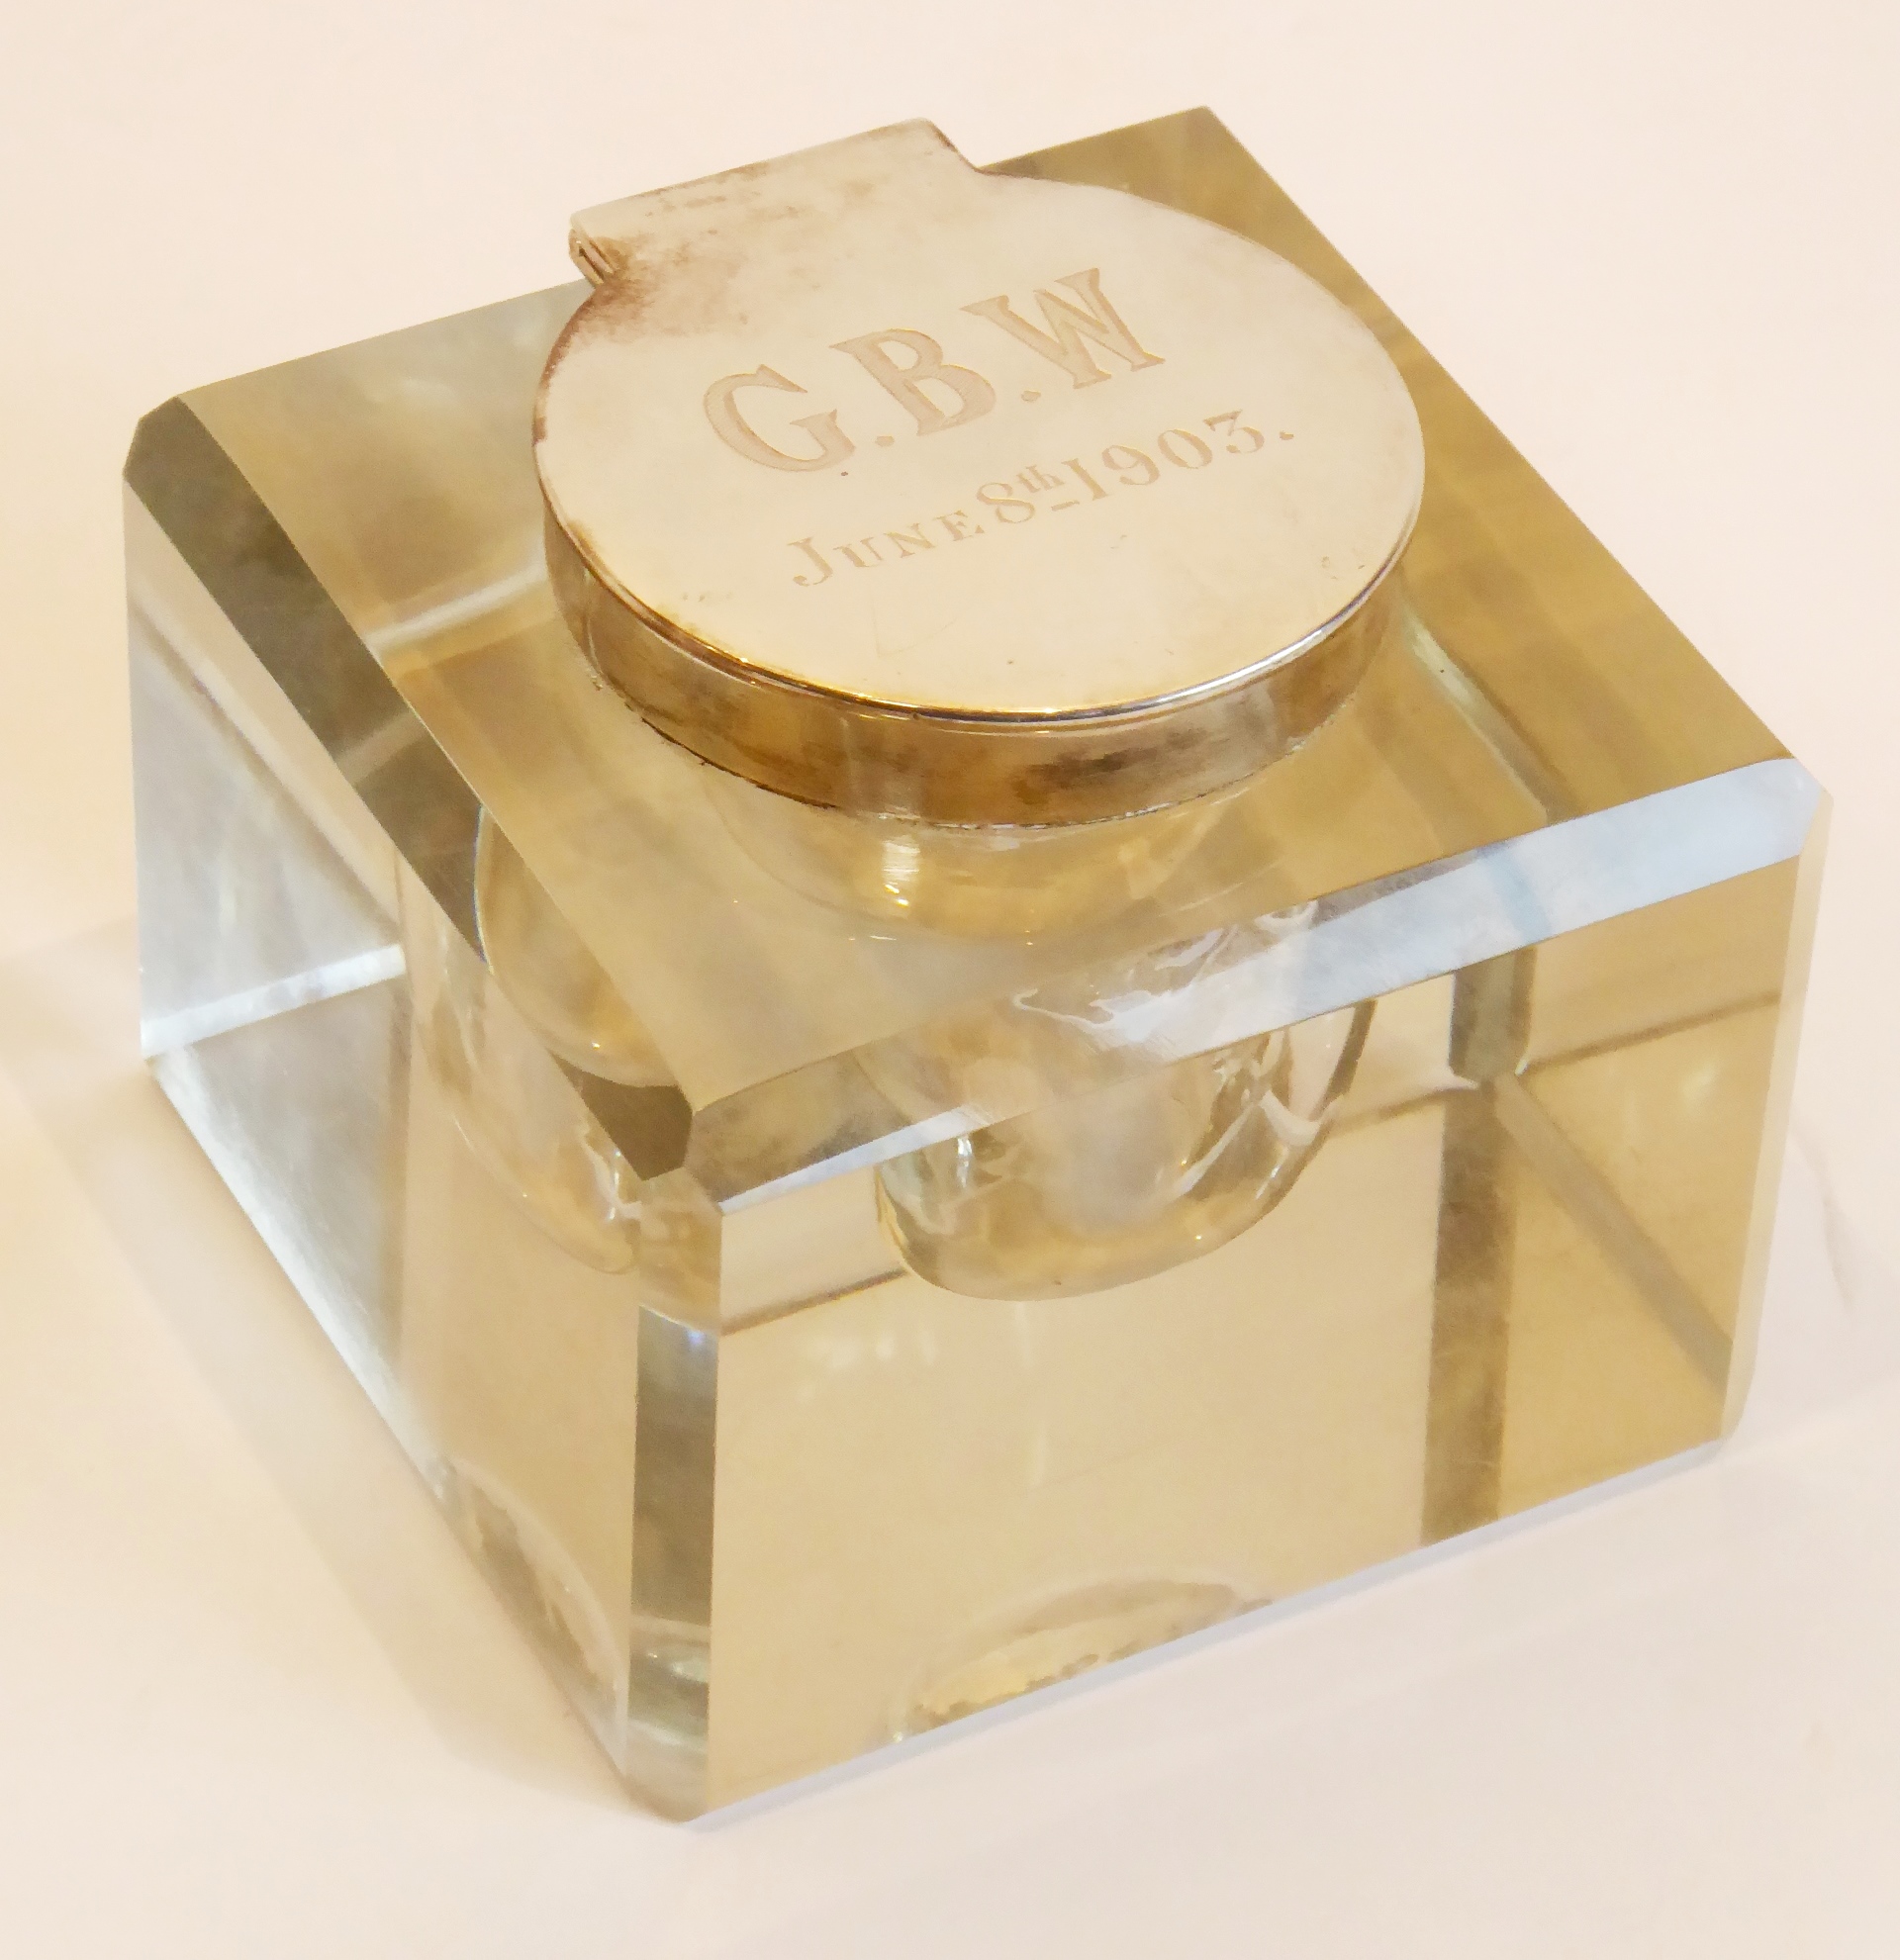 A large heavy cut-glass Edwardian inkwell of block shape with canted corners, the silver-mounted